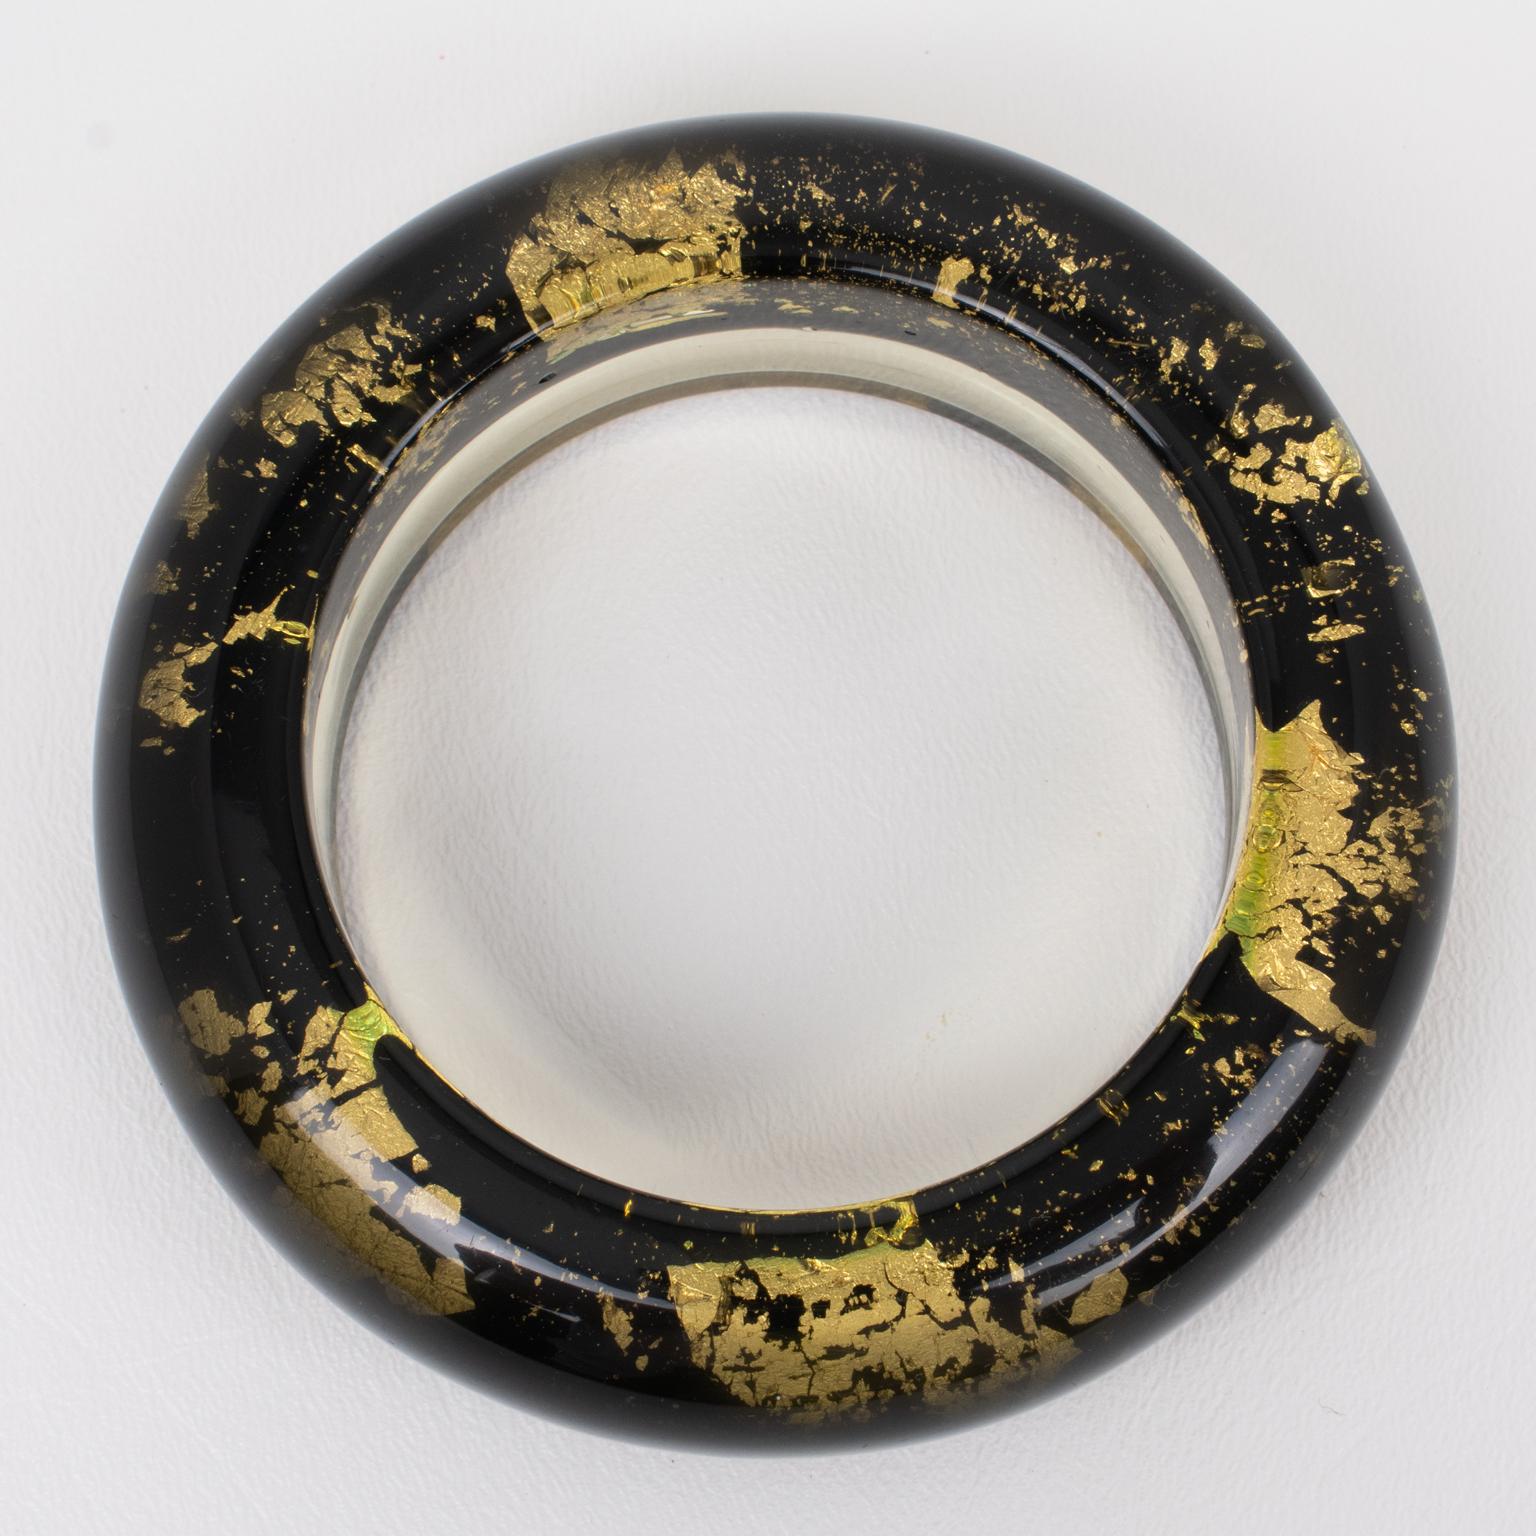 Modern John Galliano Resin Acrylic Bracelet Bangle Gold Flakes Inclusions For Sale